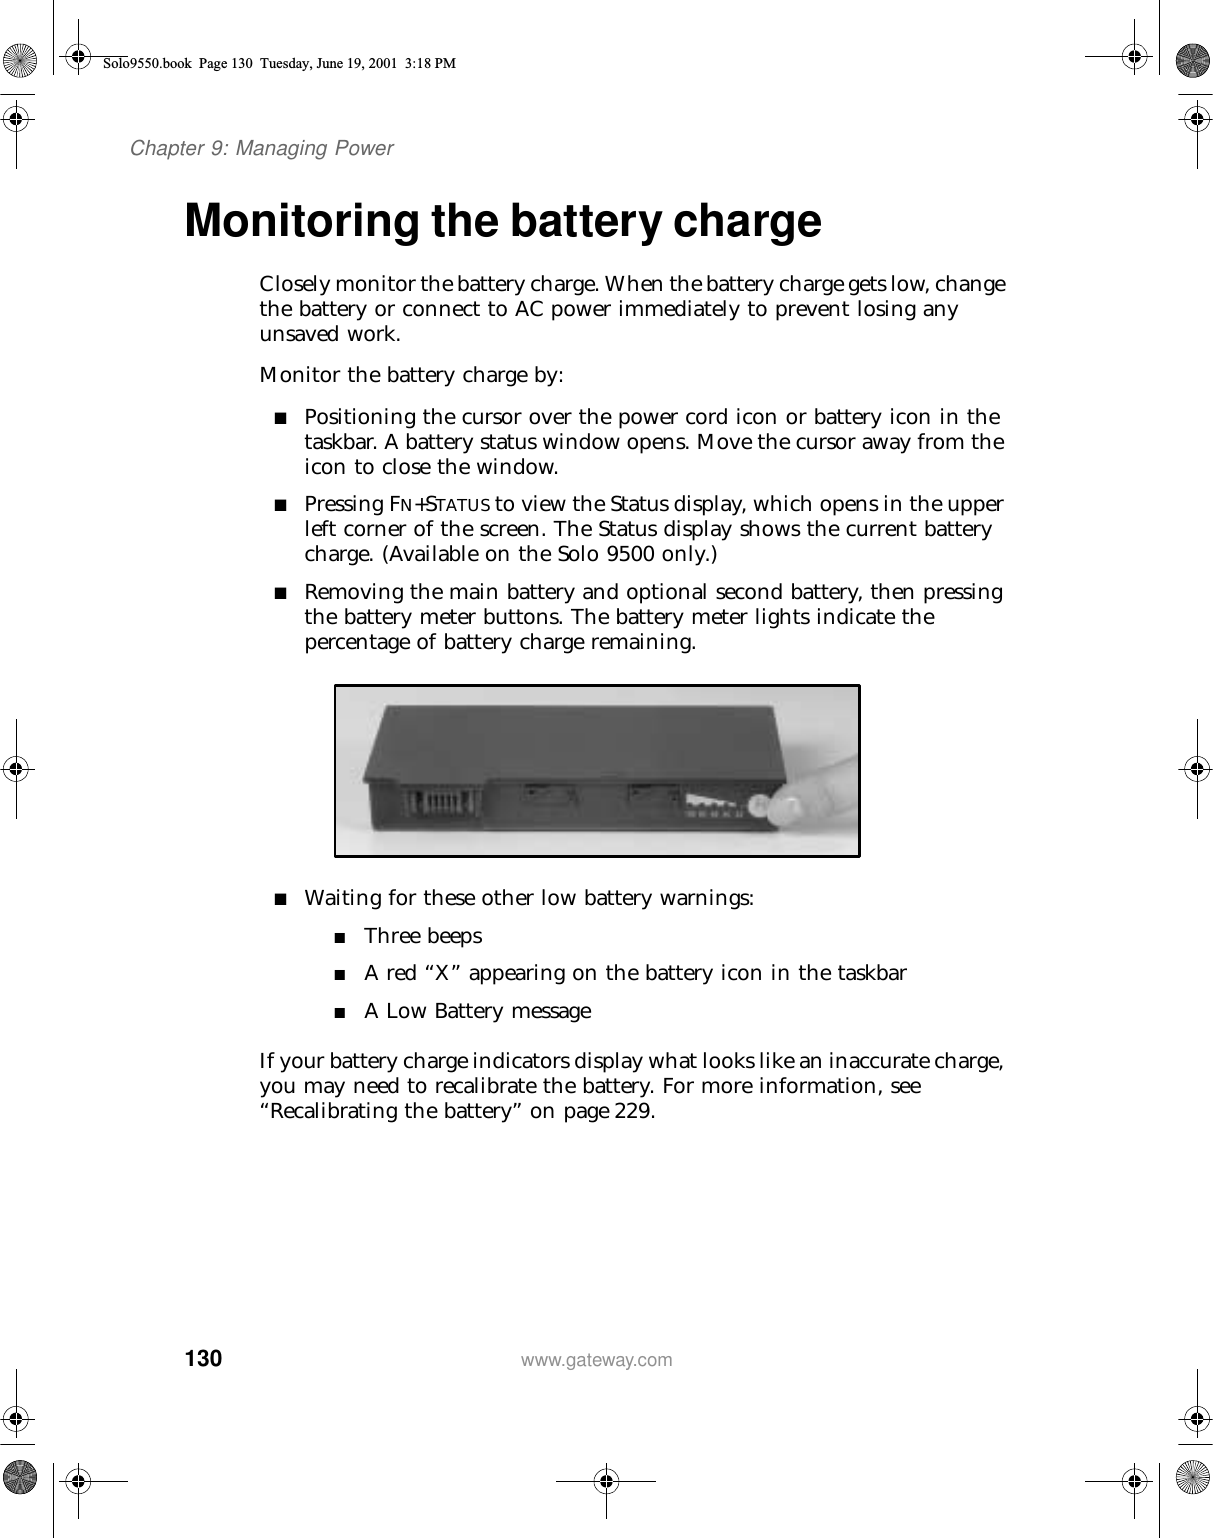 130Chapter 9: Managing Powerwww.gateway.comMonitoring the battery chargeClosely monitor the battery charge. When the battery charge gets low, change the battery or connect to AC power immediately to prevent losing any unsaved work.Monitor the battery charge by:■Positioning the cursor over the power cord icon or battery icon in the taskbar. A battery status window opens. Move the cursor away from the icon to close the window.■Pressing FN+STATUS to view the Status display, which opens in the upper left corner of the screen. The Status display shows the current battery charge. (Available on the Solo 9500 only.)■Removing the main battery and optional second battery, then pressing the battery meter buttons. The battery meter lights indicate the percentage of battery charge remaining.■Waiting for these other low battery warnings:■Three beeps■A red “X” appearing on the battery icon in the taskbar■A Low Battery messageIf your battery charge indicators display what looks like an inaccurate charge, you may need to recalibrate the battery. For more information, see “Recalibrating the battery” on page 229.Solo9550.book Page 130 Tuesday, June 19, 2001 3:18 PM